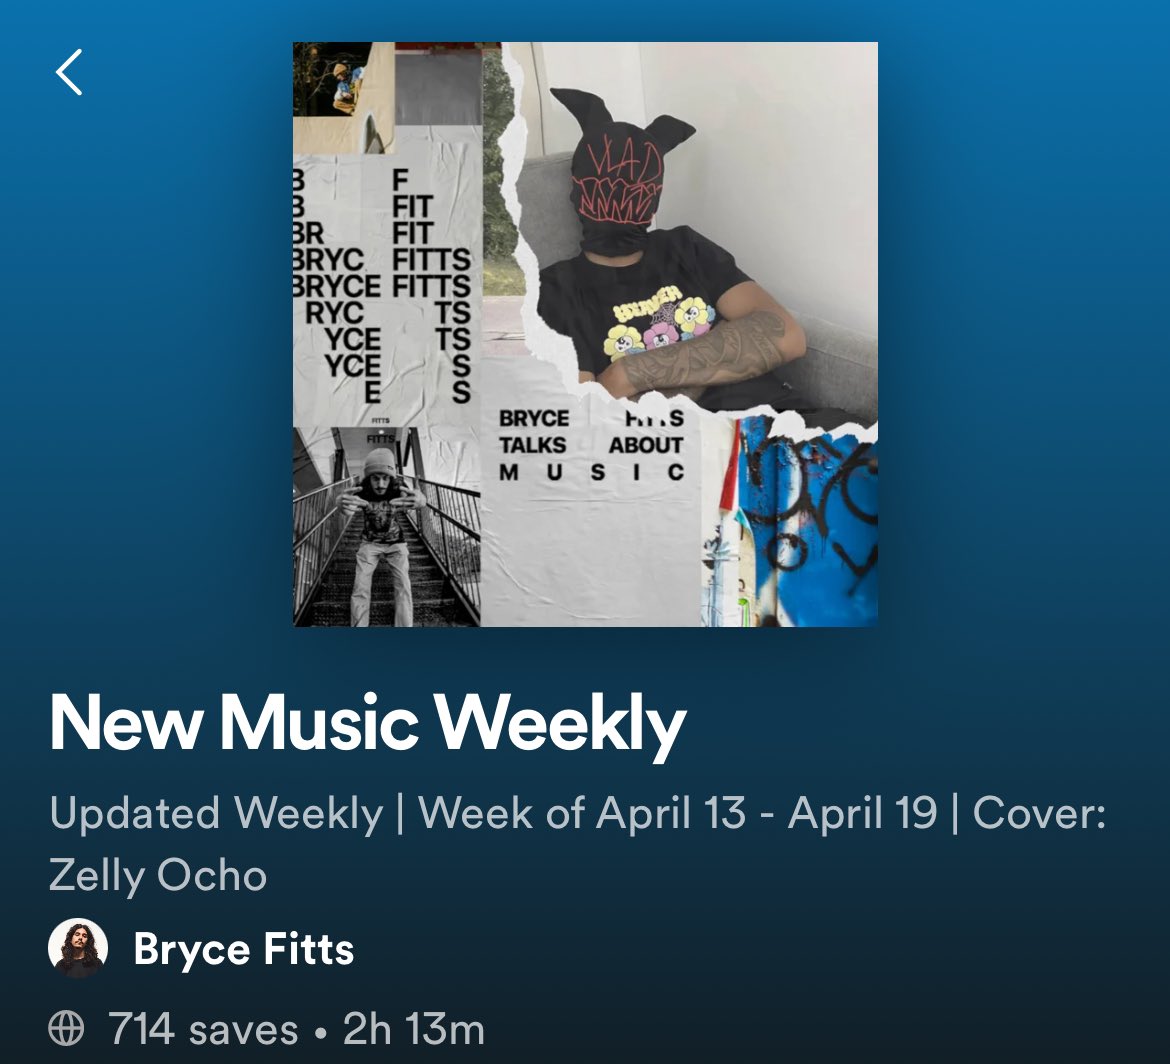 The NEW MUSIC WEEKLY playlist has been updated with the best tracks of the week from: ▫️@Zellyocho1 ▫️@unotheactivist ▫️@Alchemist ▫️@Logic301 ▫️@Mez ▫️@berner415 & MORE